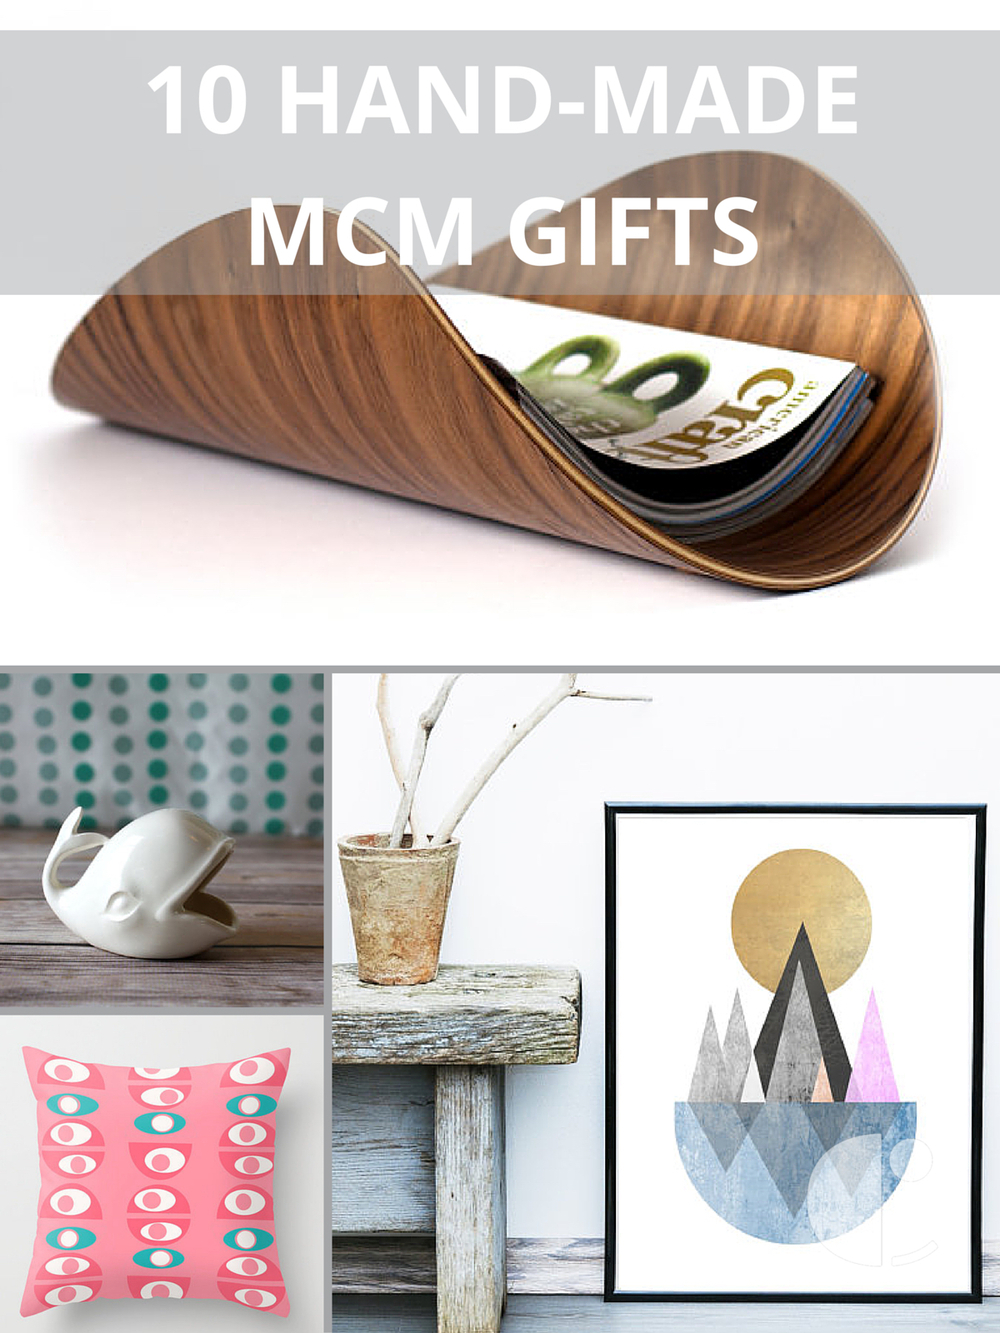 10 MCM Gifts that are Handmade